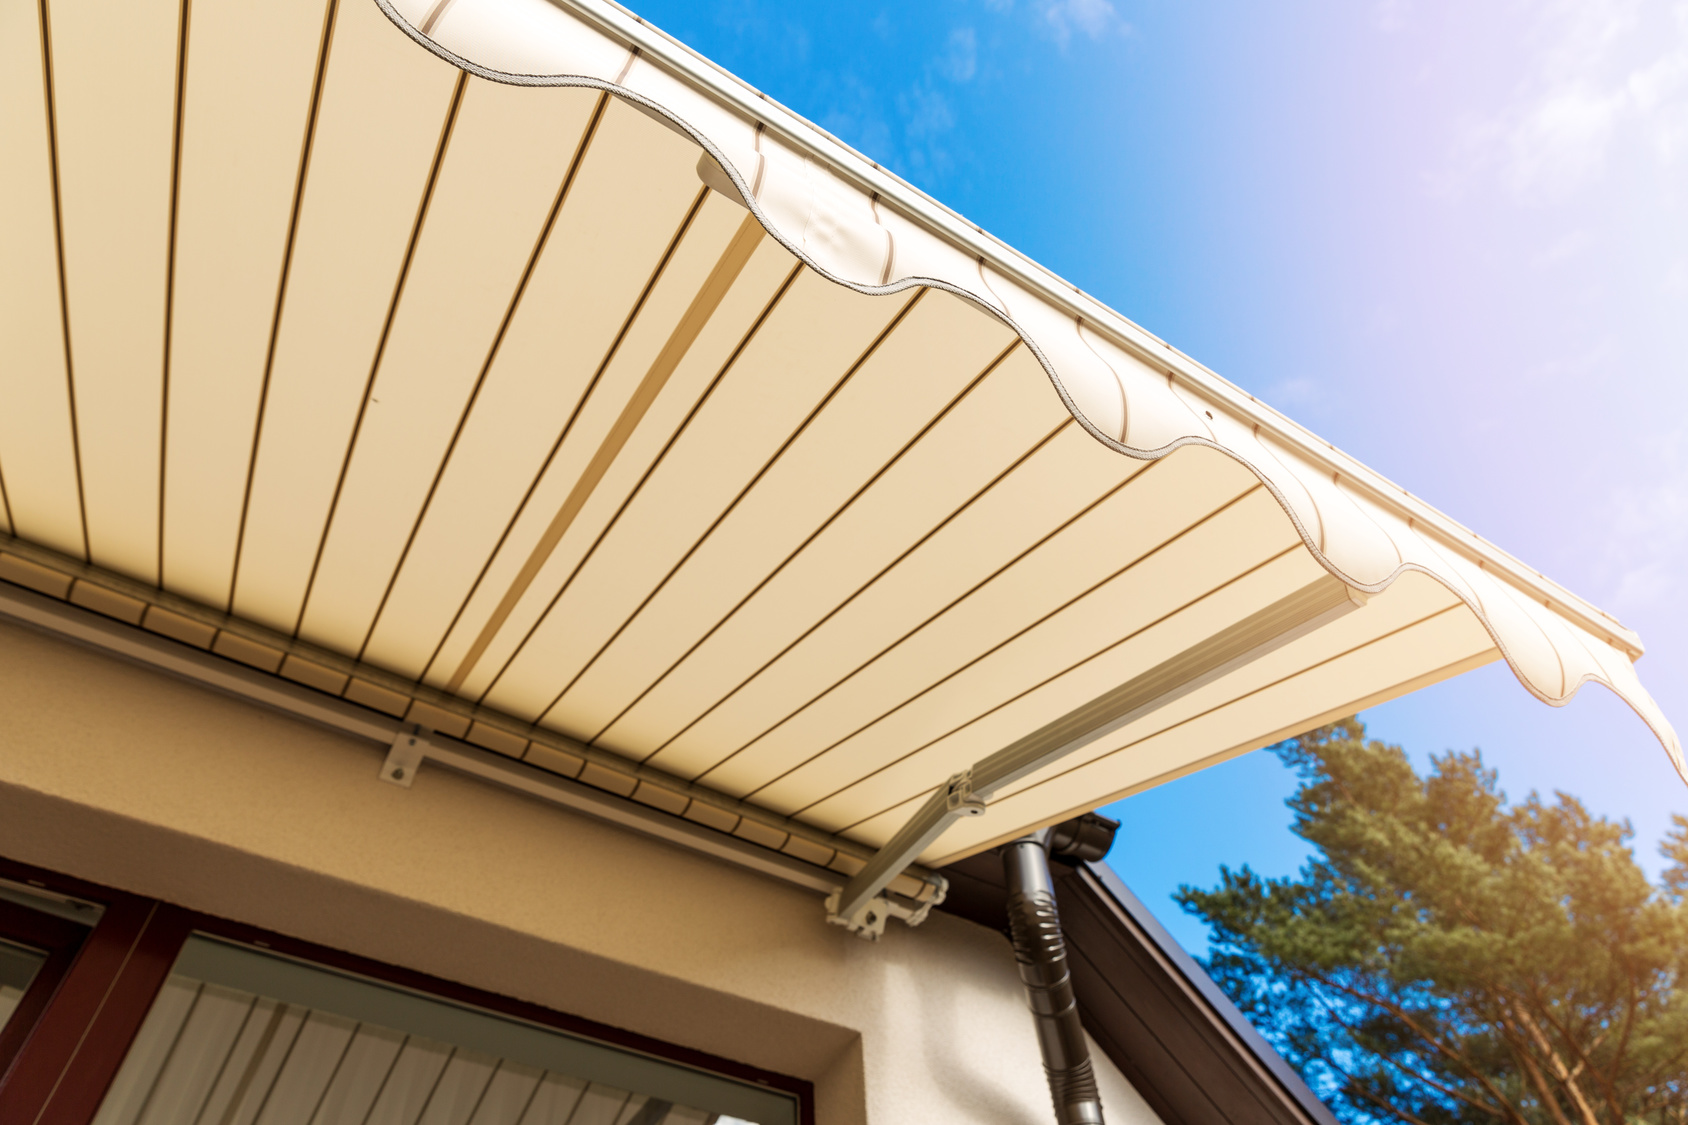 installing your awning in the sun